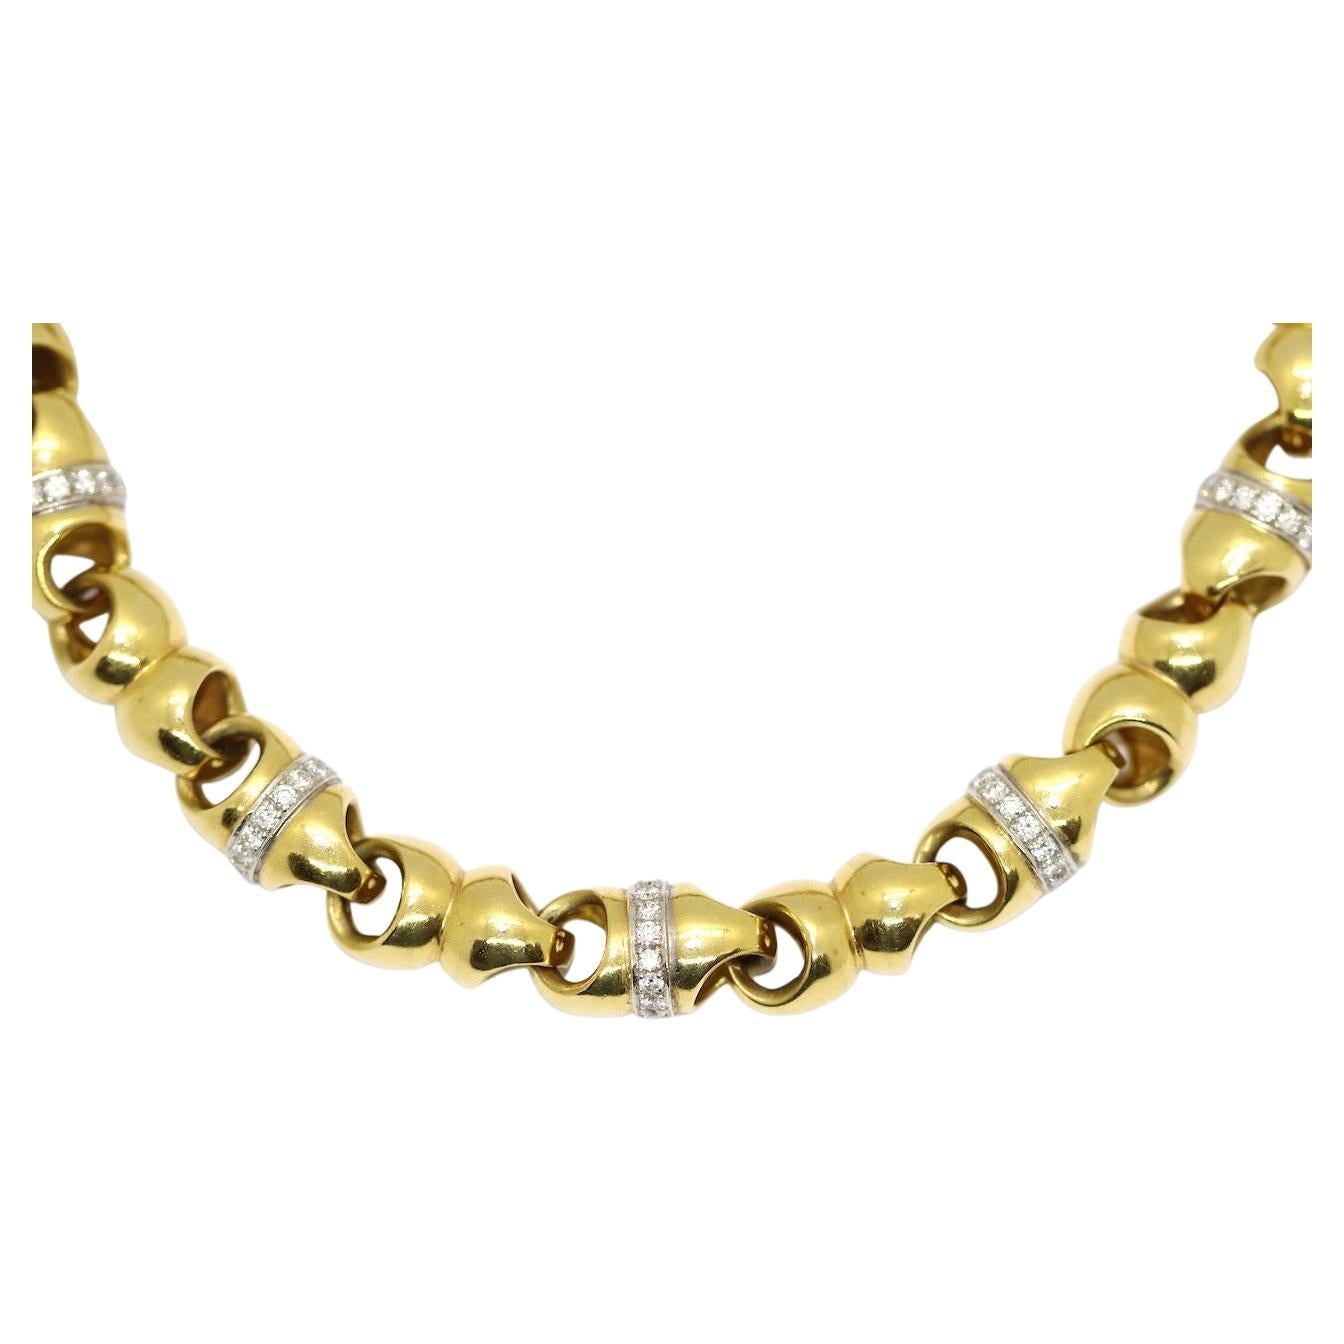 Heavy, Solid Chain Link Necklace, 18 Karat Gold with Diamonds For Sale